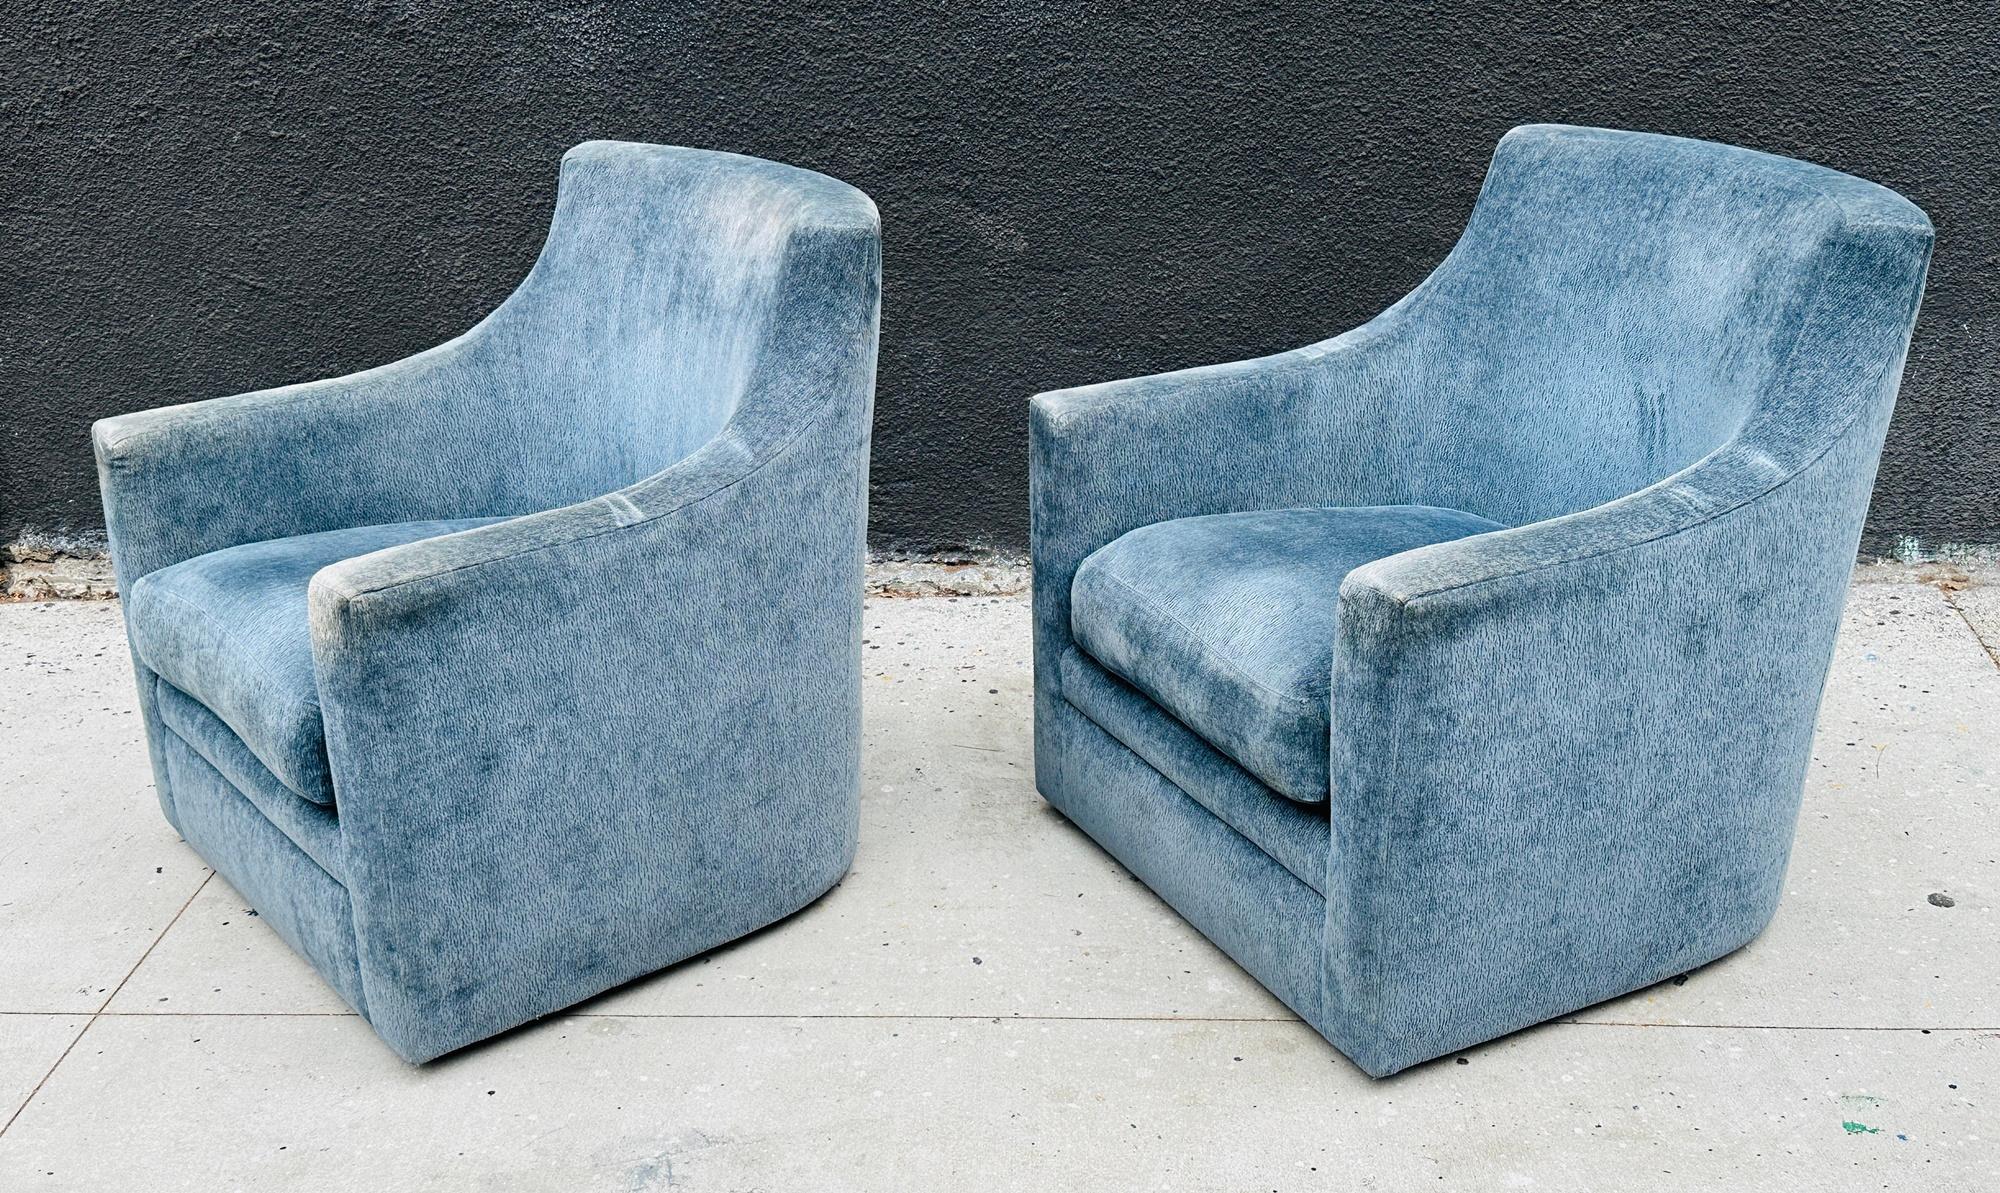 Introducing a timeless duo of sophistication and comfort, the Pair of Barrel-Back Chairs on Swivel Mechanism, USA 1990's. Crafted to perfection, these exquisite chairs not only elevate your space but also provide a luxurious seating experience.
The